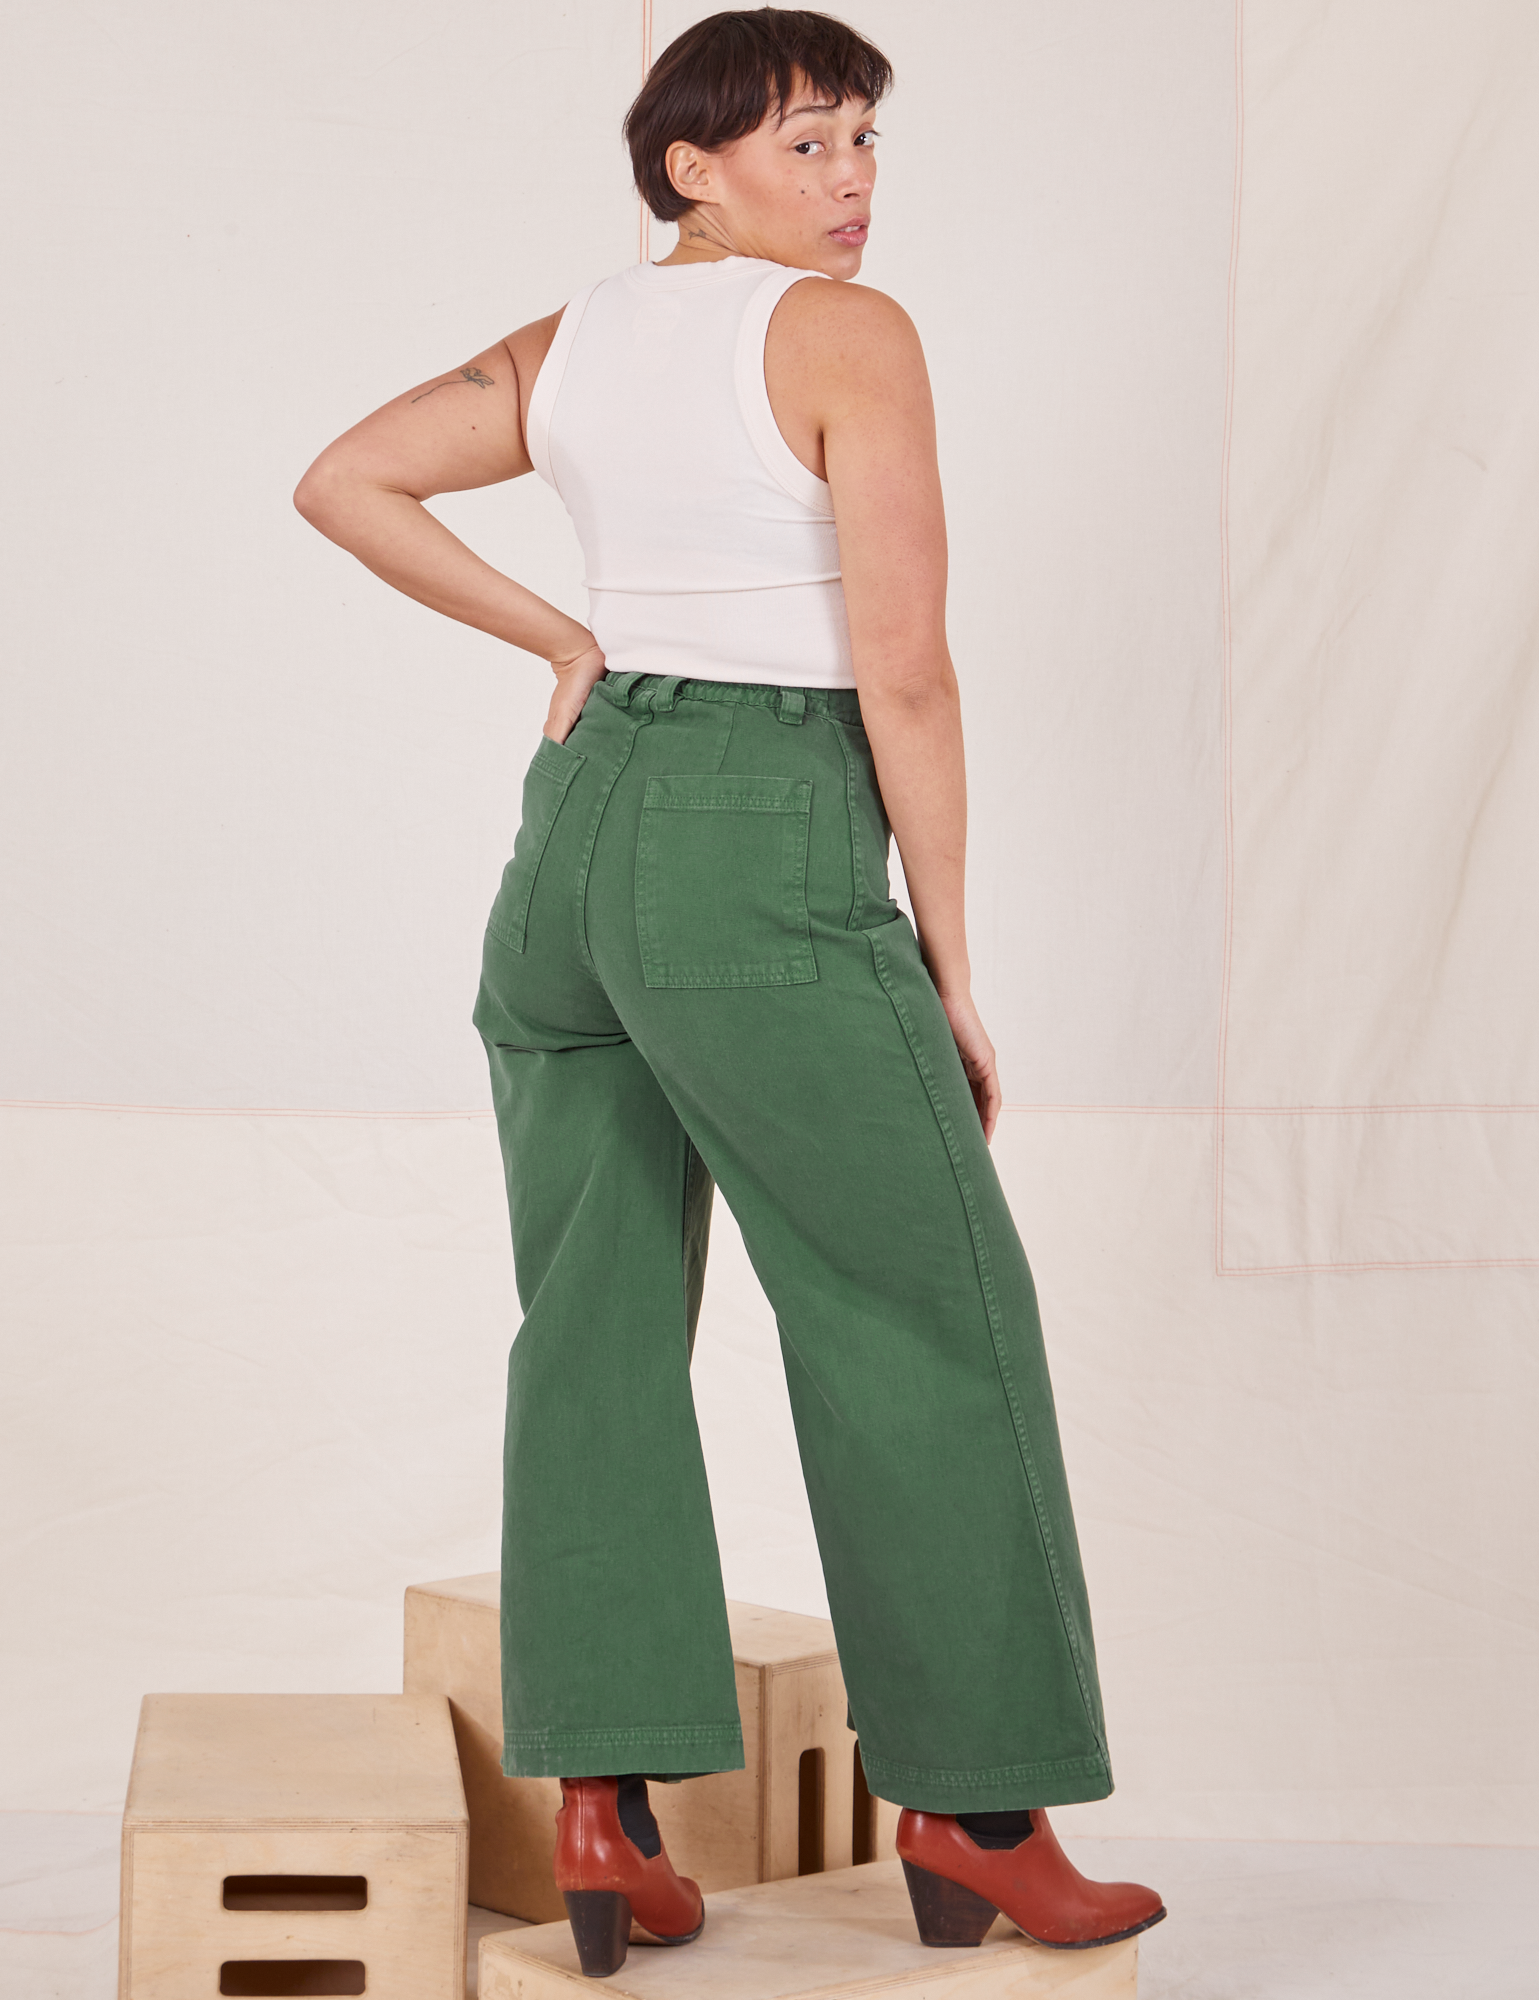 Back view of Bell Bottoms in Dark Emerald Green and vintage off-white Tank Top worn by Tiara